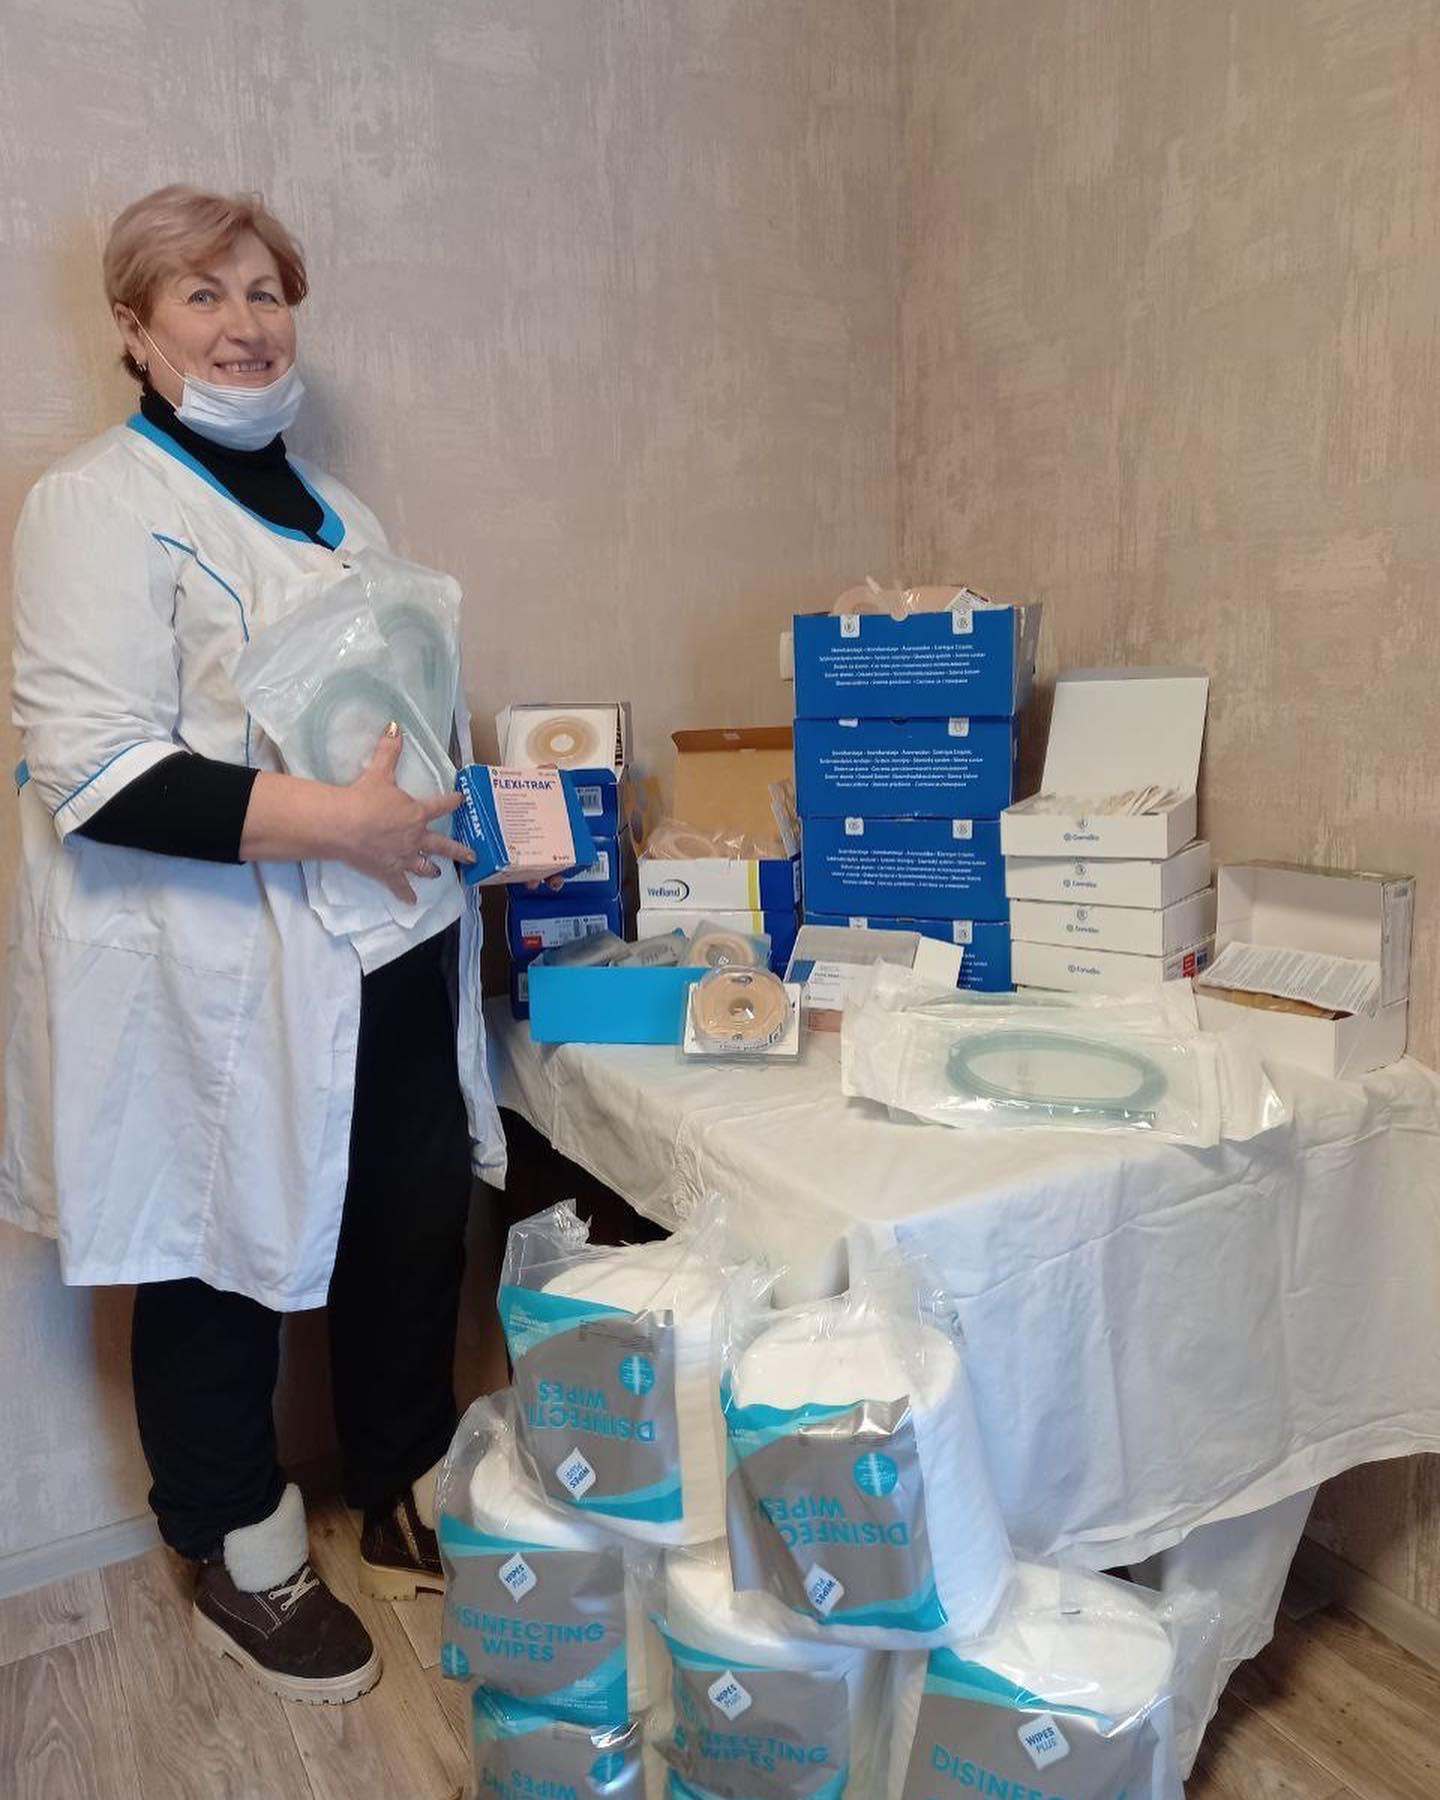 A woman standing next to a table full of medical supplies.